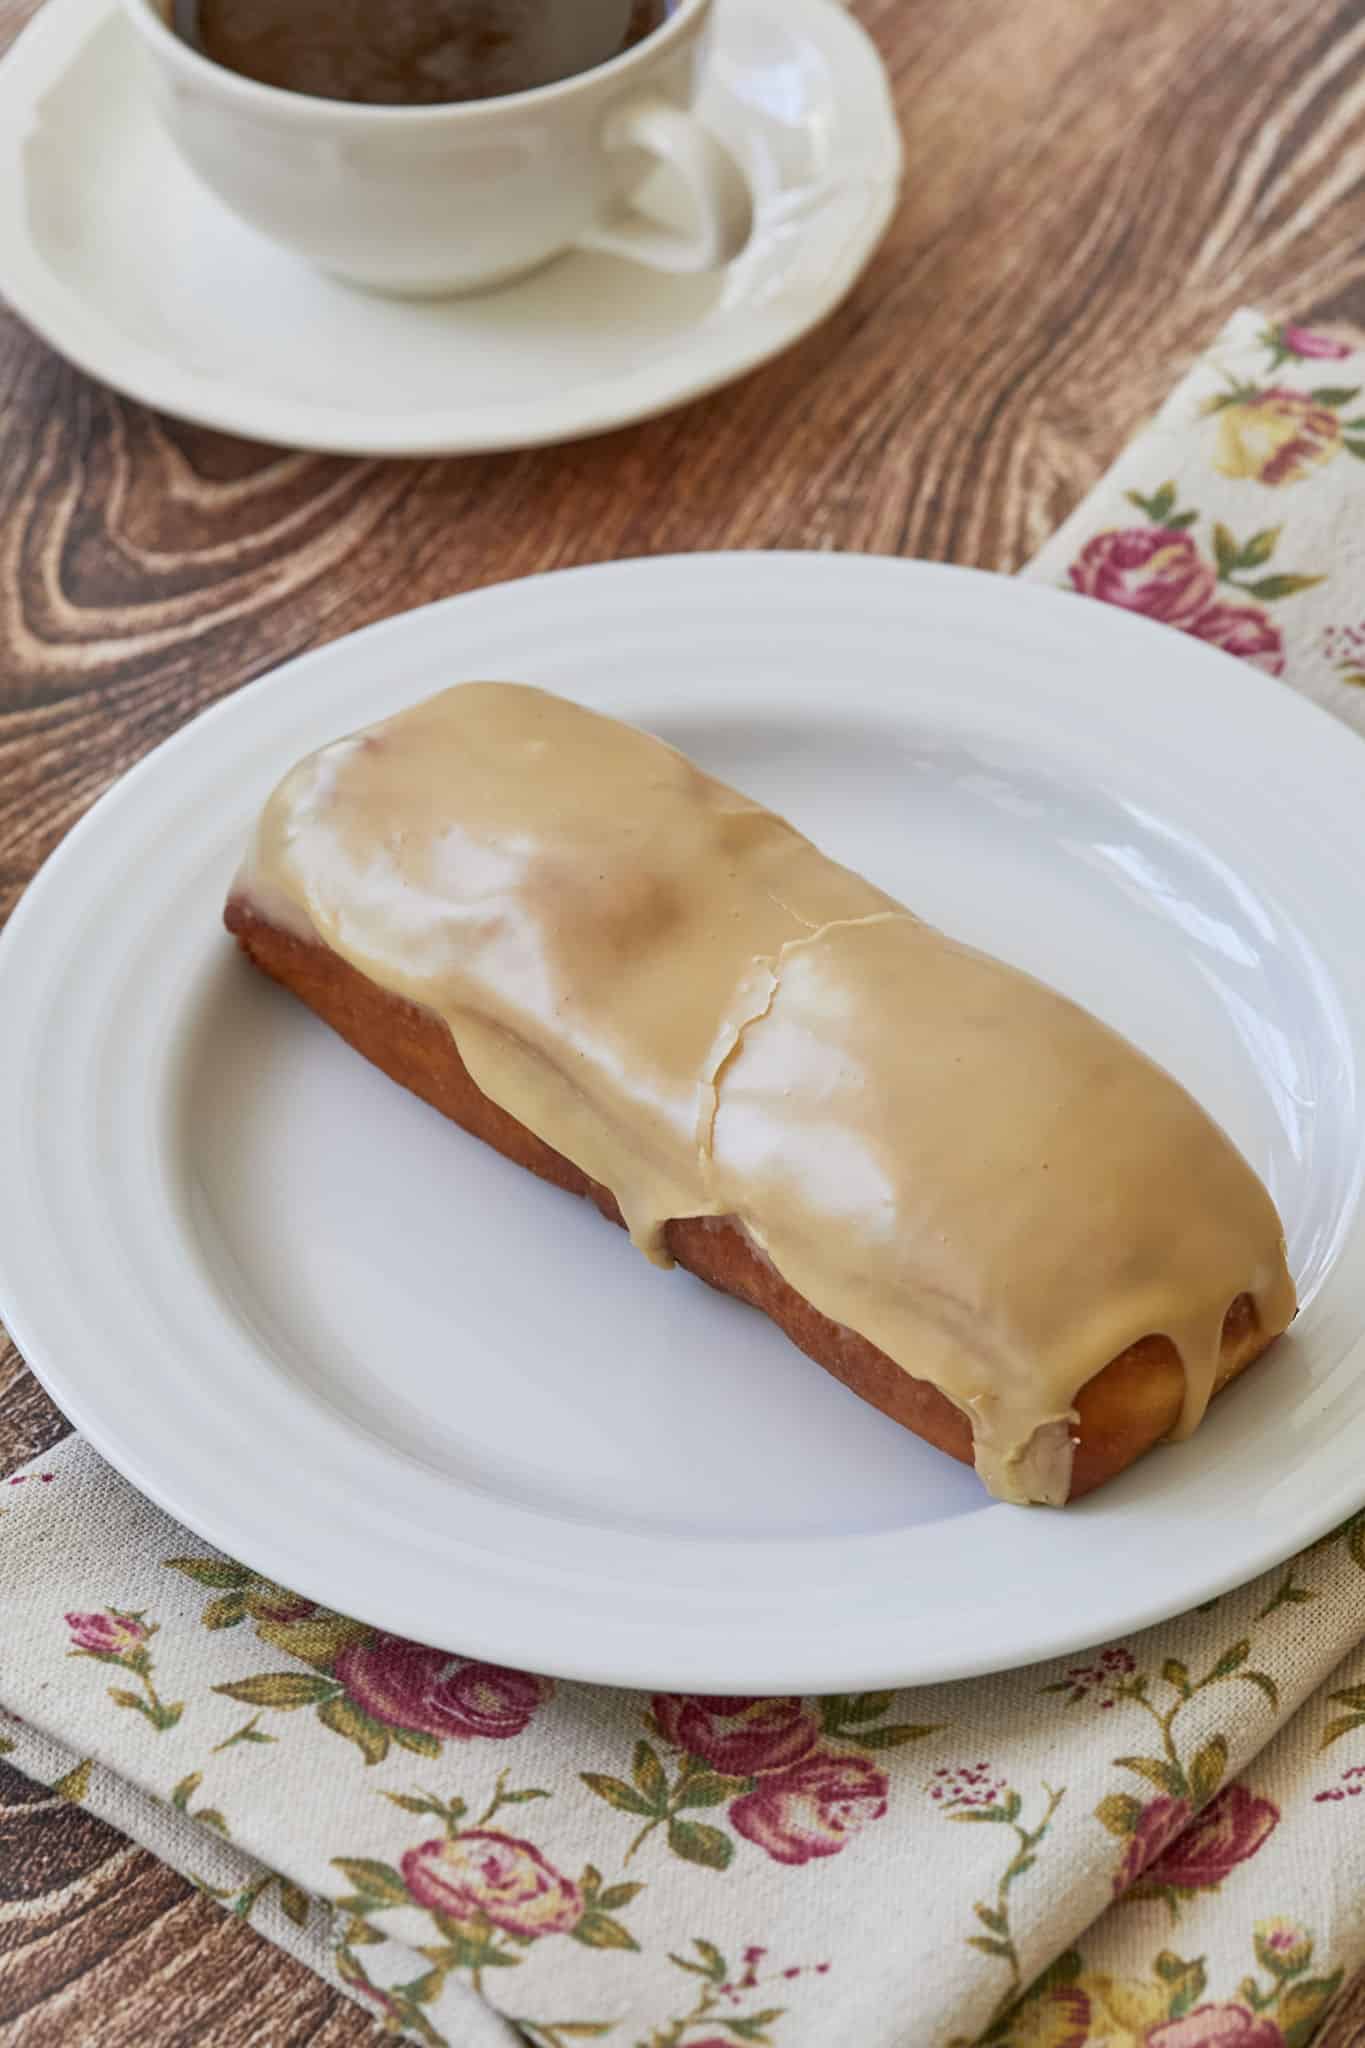 A single maple bar donut is served on a white plate near a black cup of coffee.